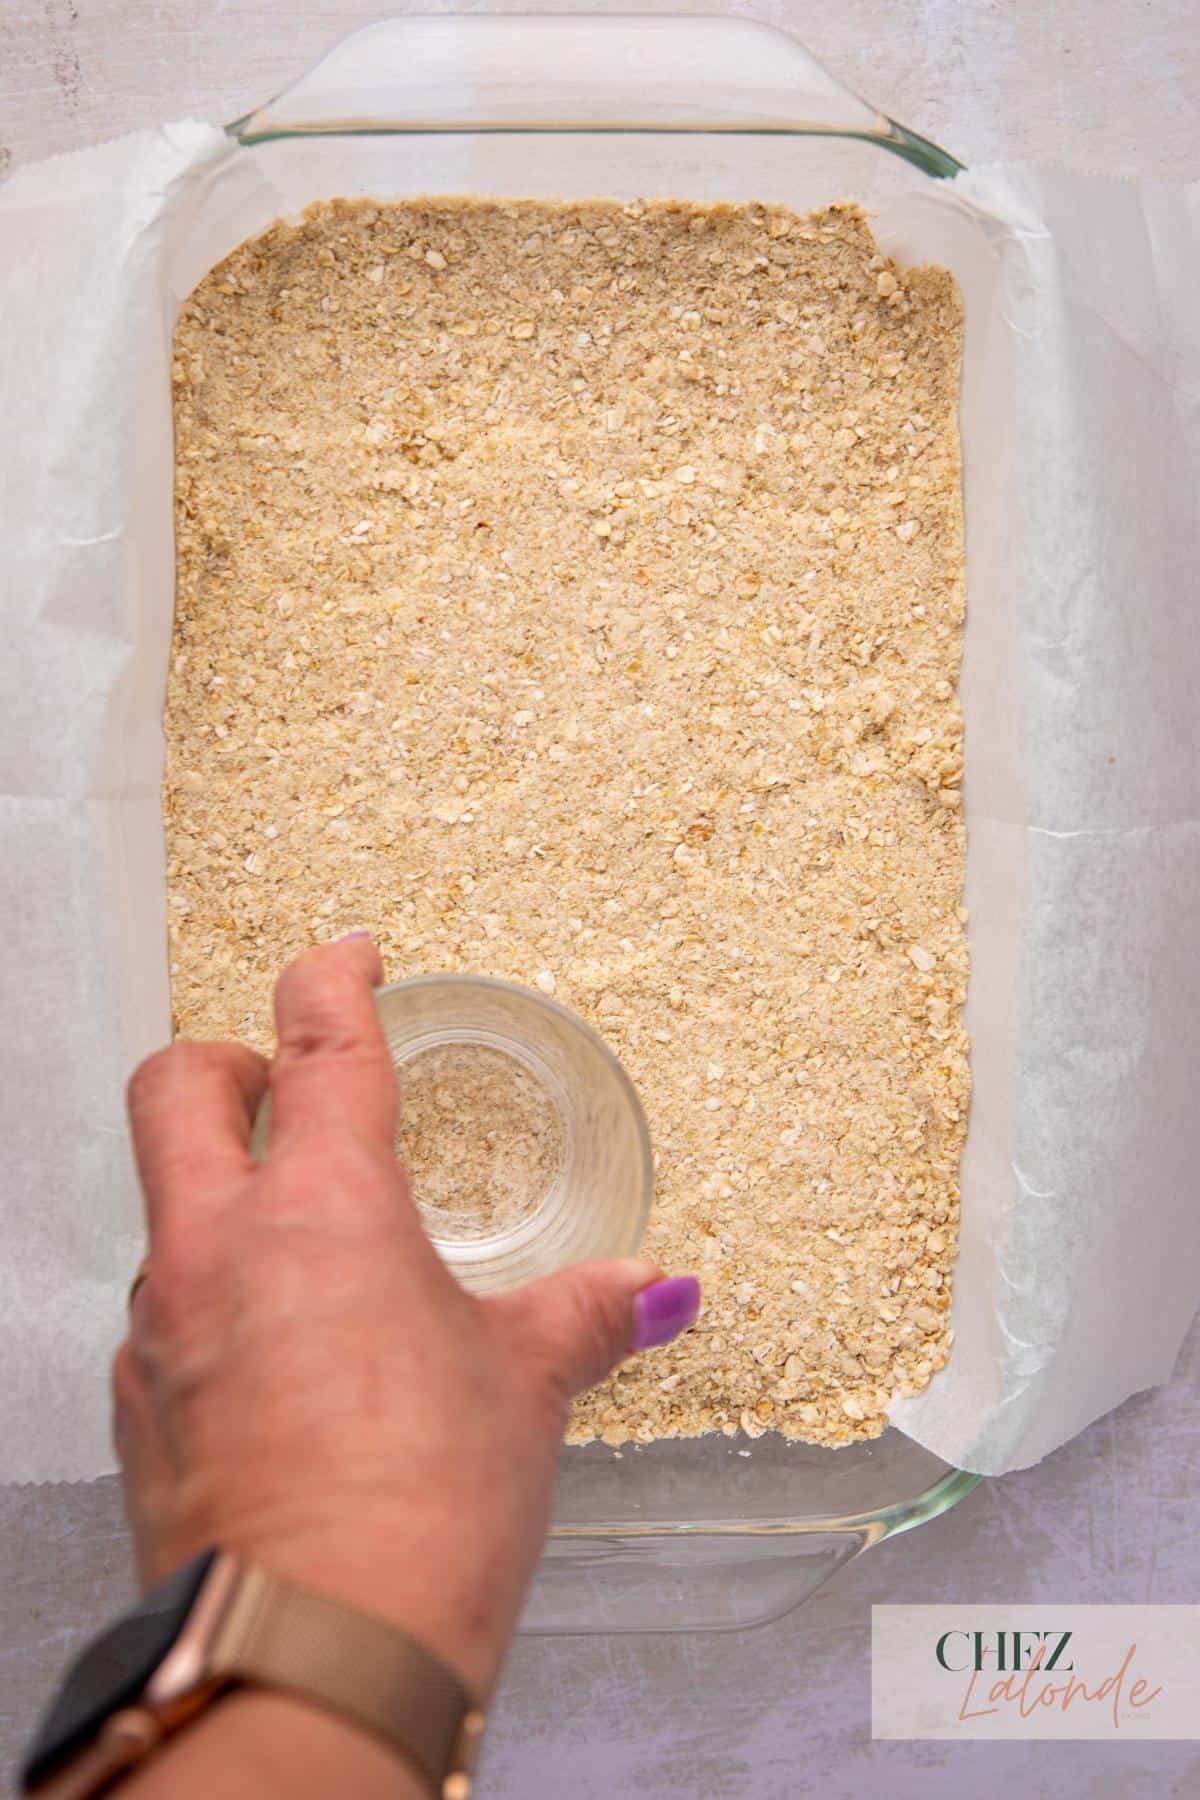 A person holding a glass and press oatmeal in it.